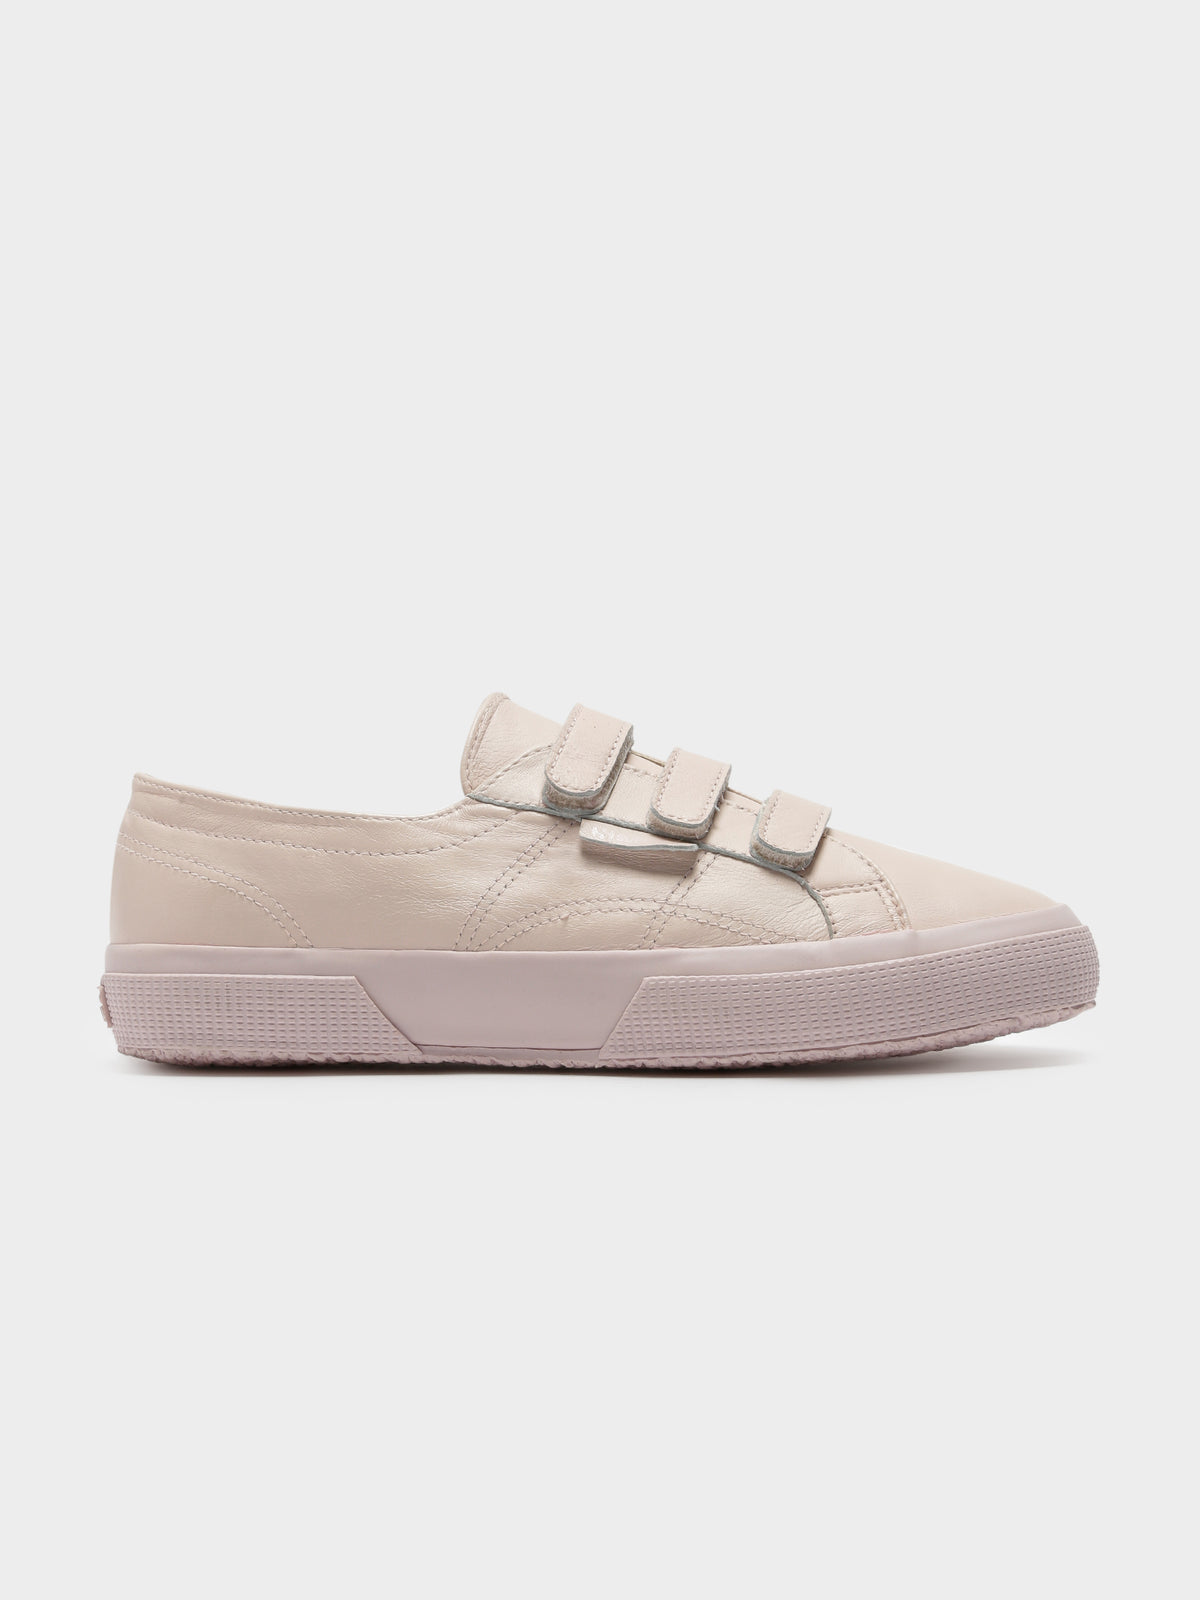 Womens 2750 NAPVW Velcro Sneakers in Pink Skin - Glue Store